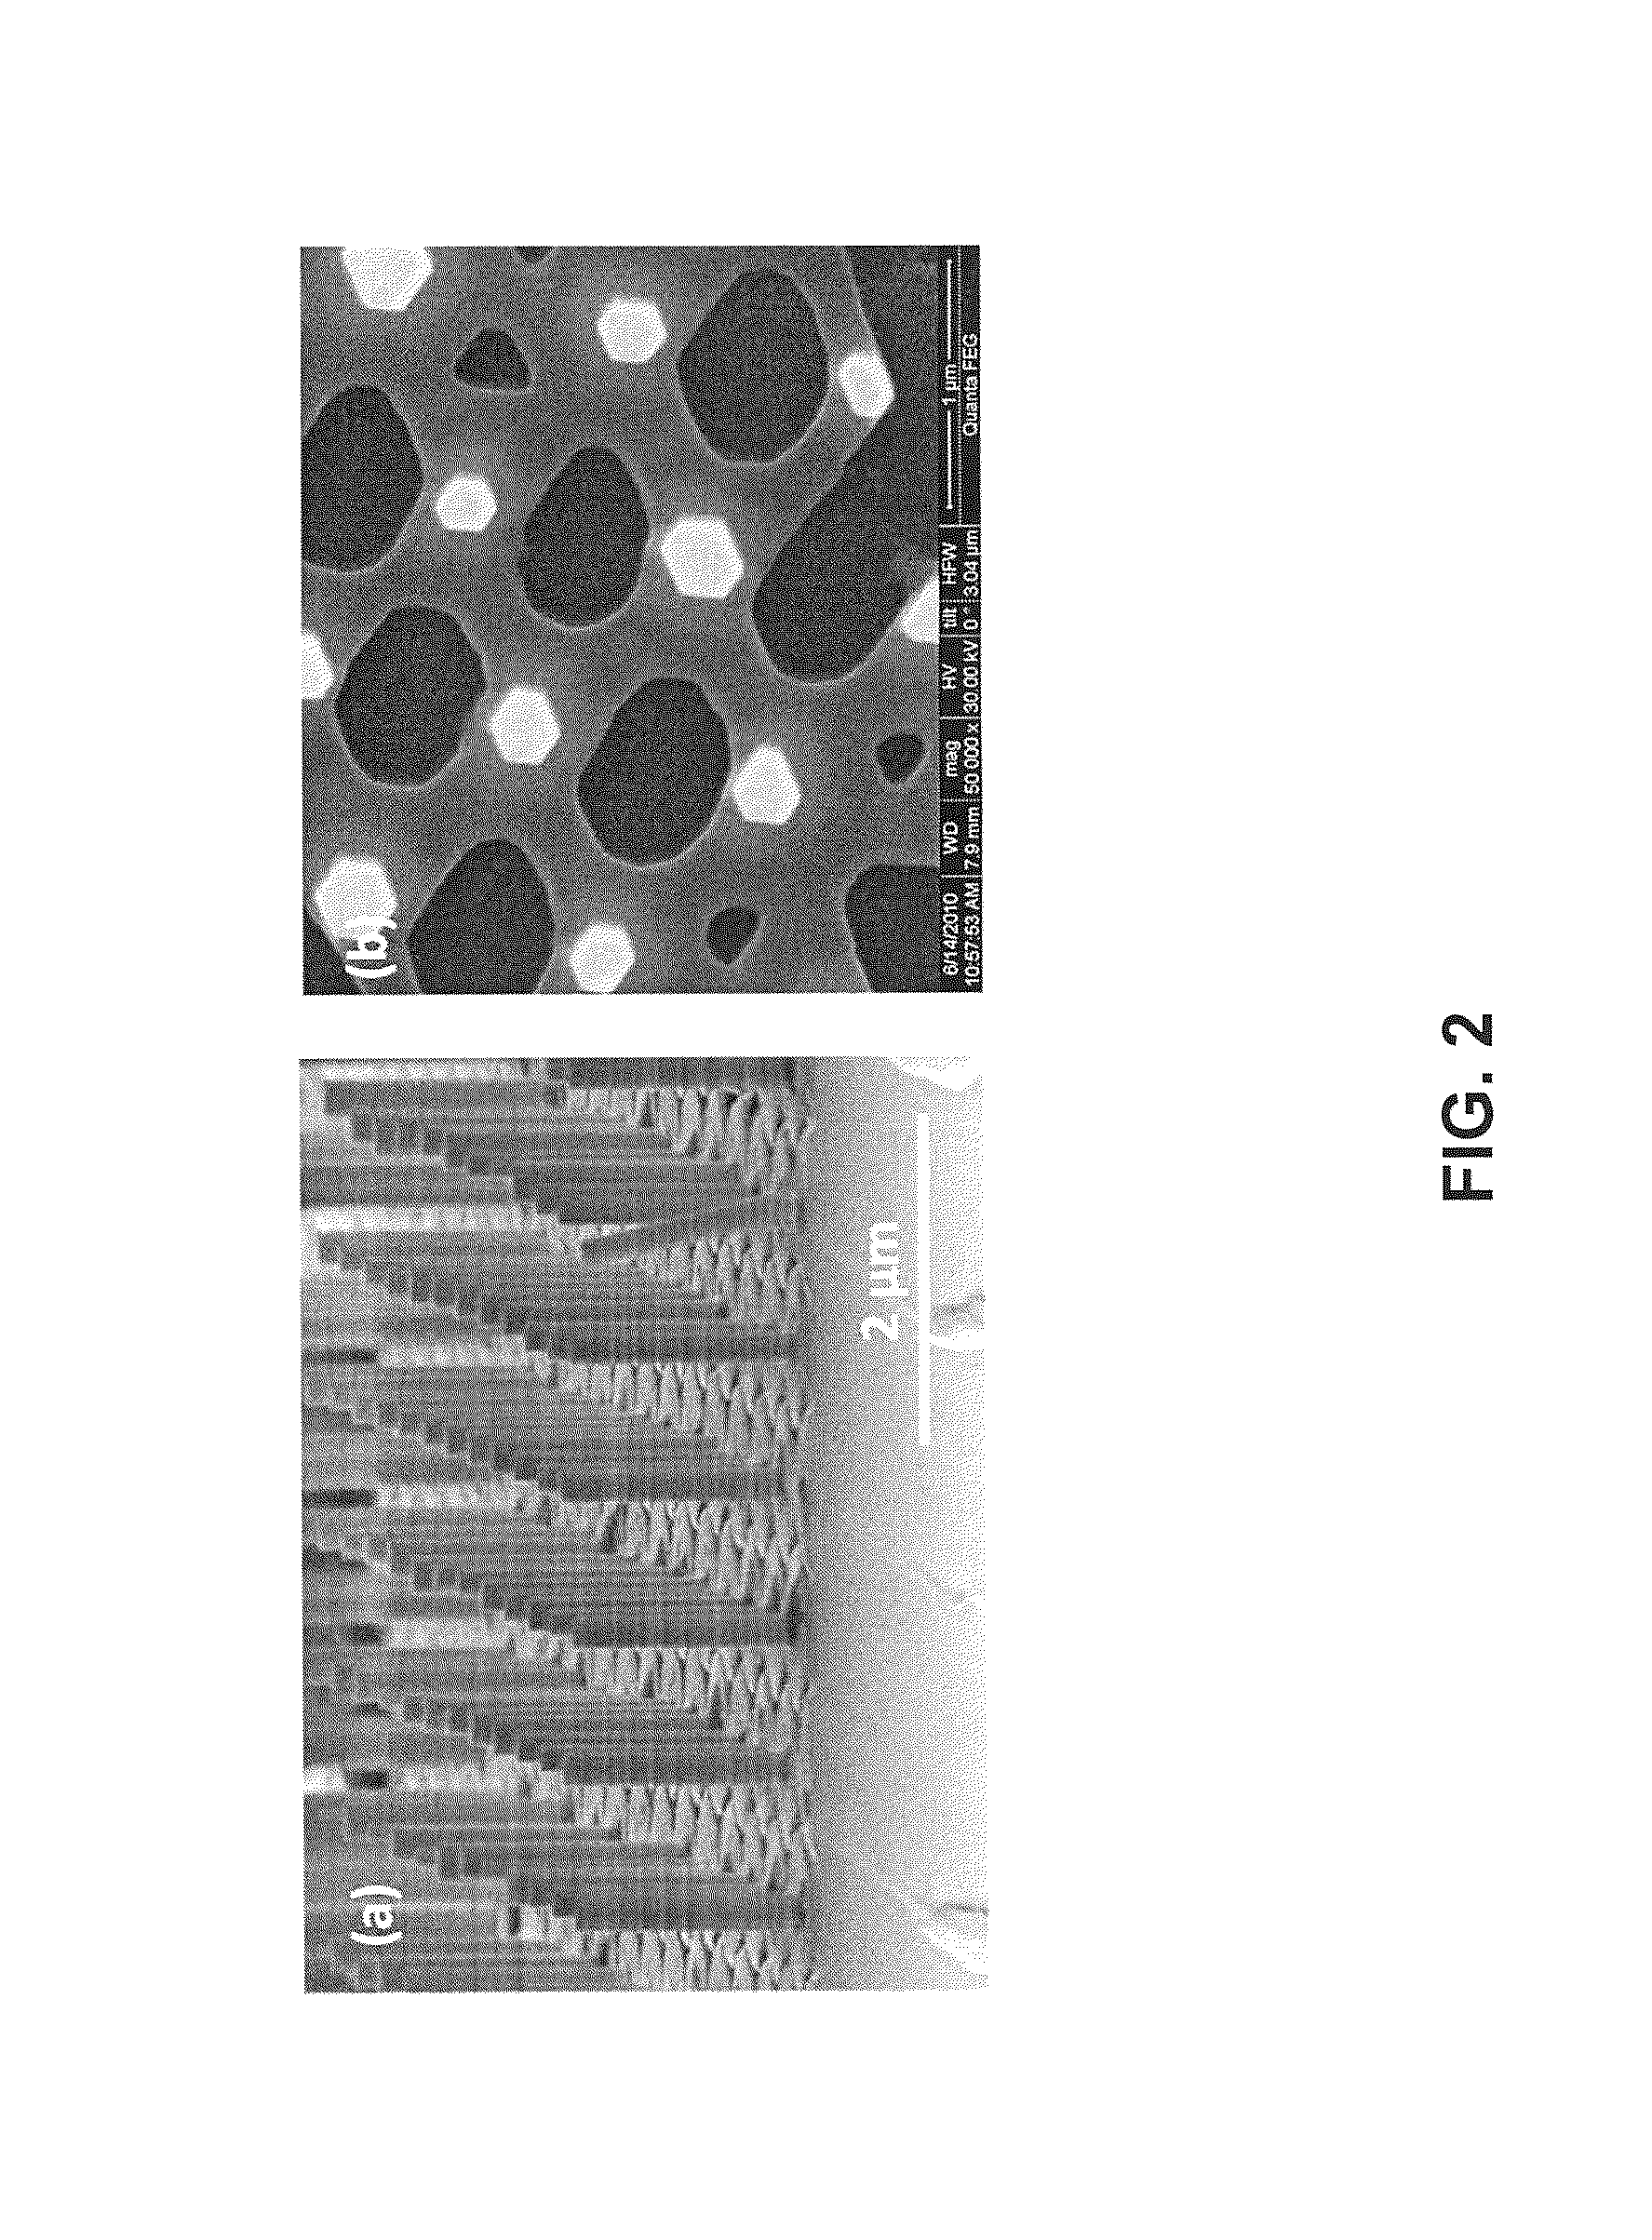 Amber light-emitting diode comprising a group III-nitride nanowire active region